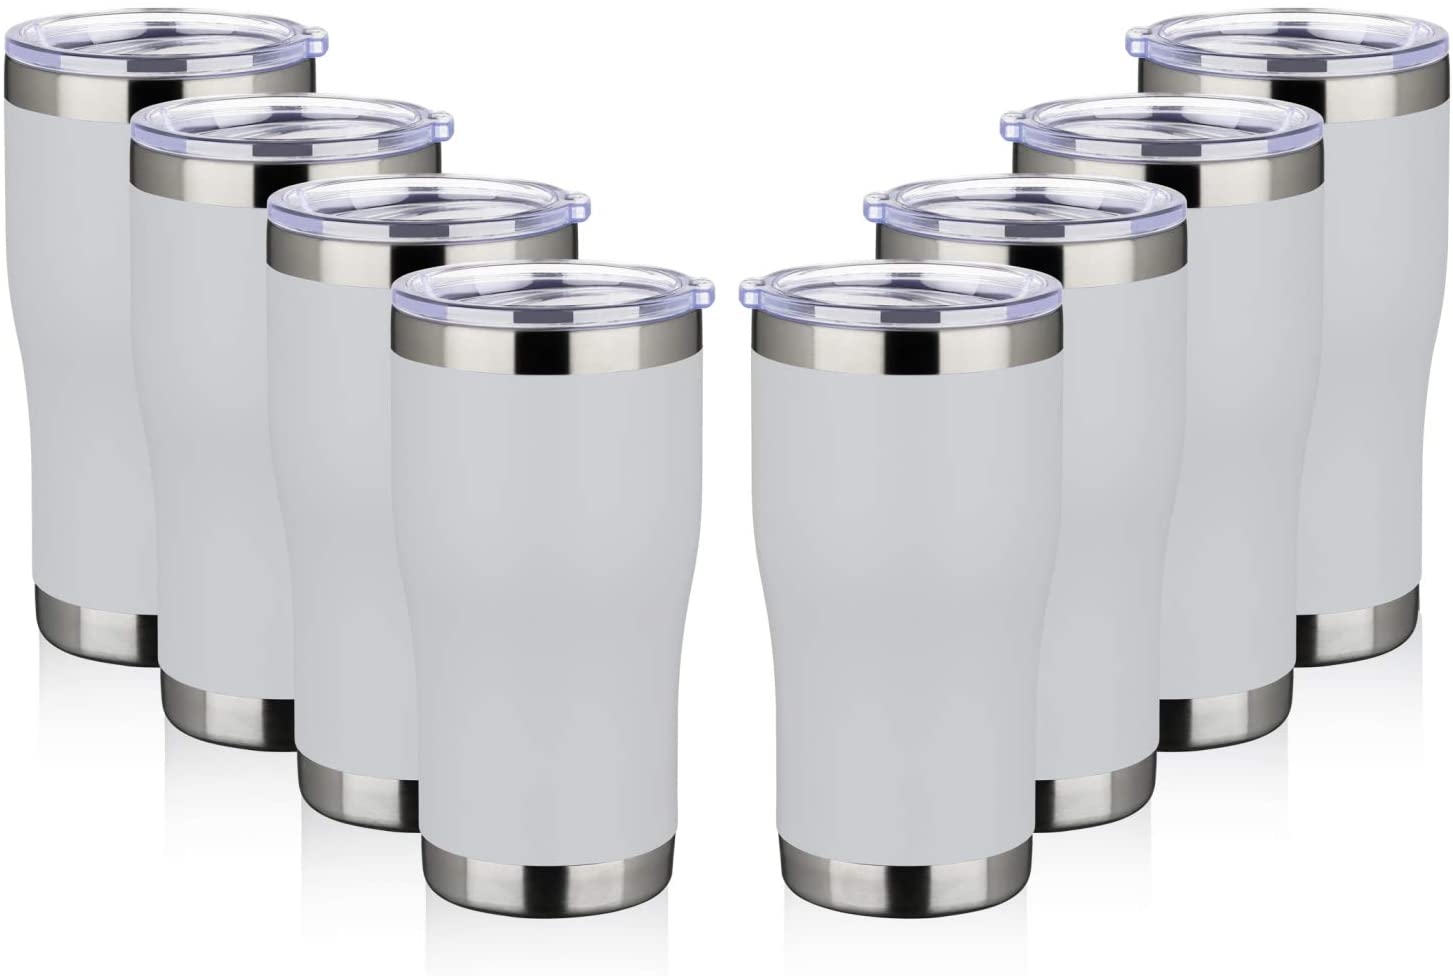 5  Reasons Why You Should Choose a Stainless Steel Cup Over Other Cups